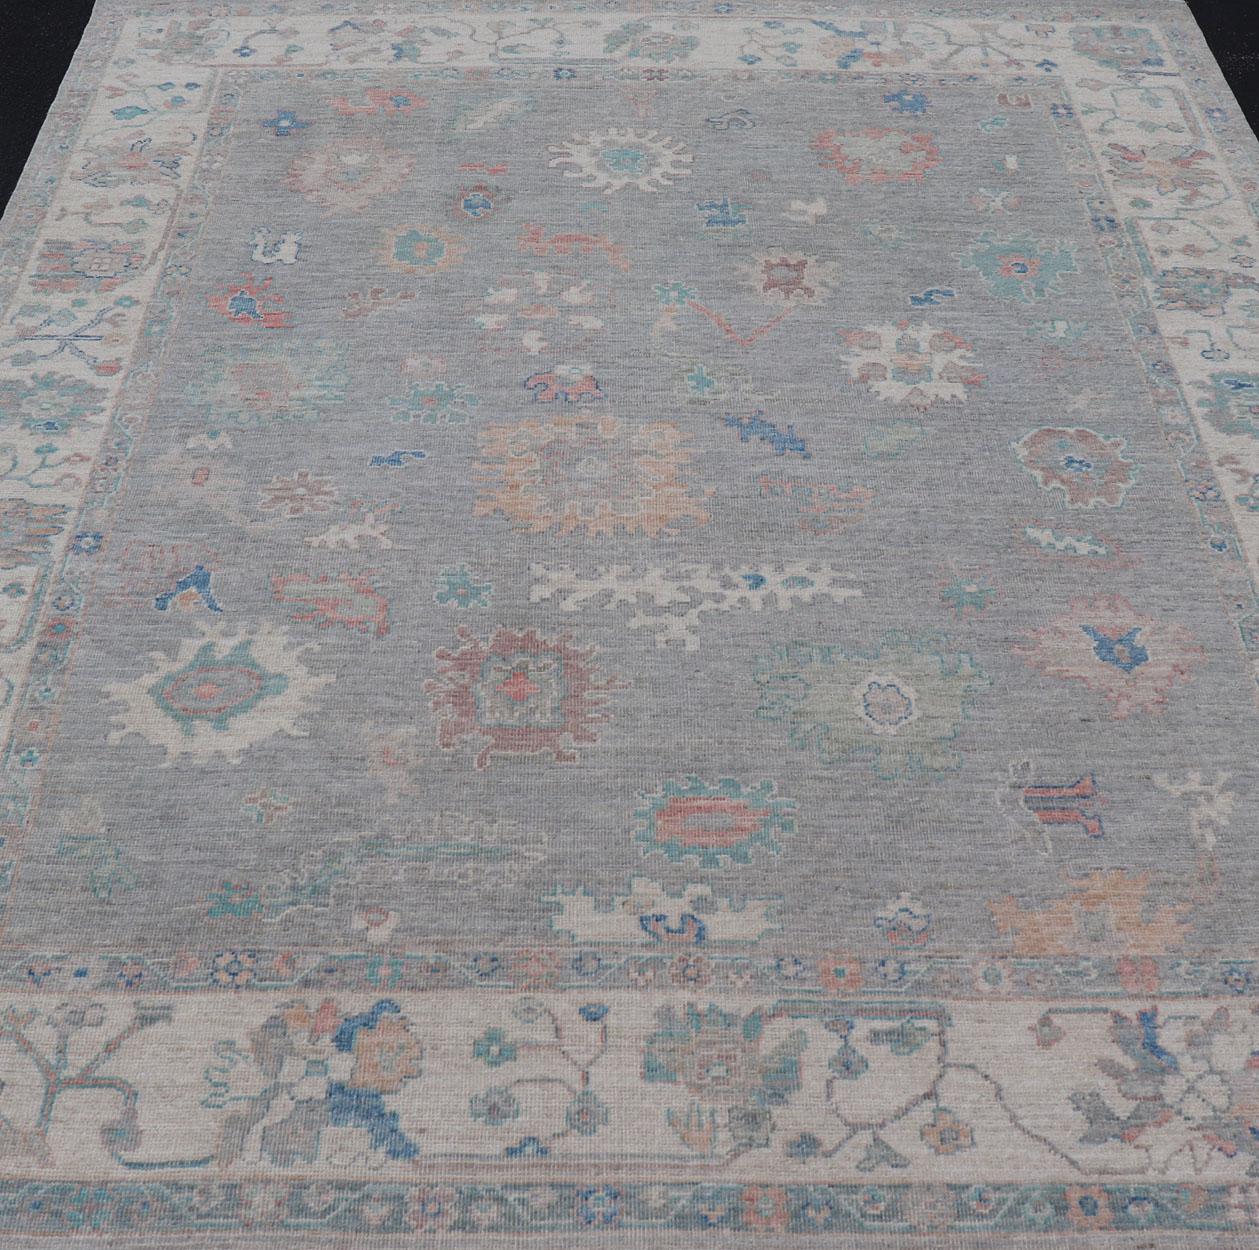 Measures: 7'10 x 9'8 
All Over Modern Floral Oushak with A Light Blue-Gray Field and Border With Color. Keivan Woven Arts; rug AWR-12018 Country of Origin: Afghanistan Type: Oushak Design: All-Over, Floral, Arabesque-Floral 21st Century

This